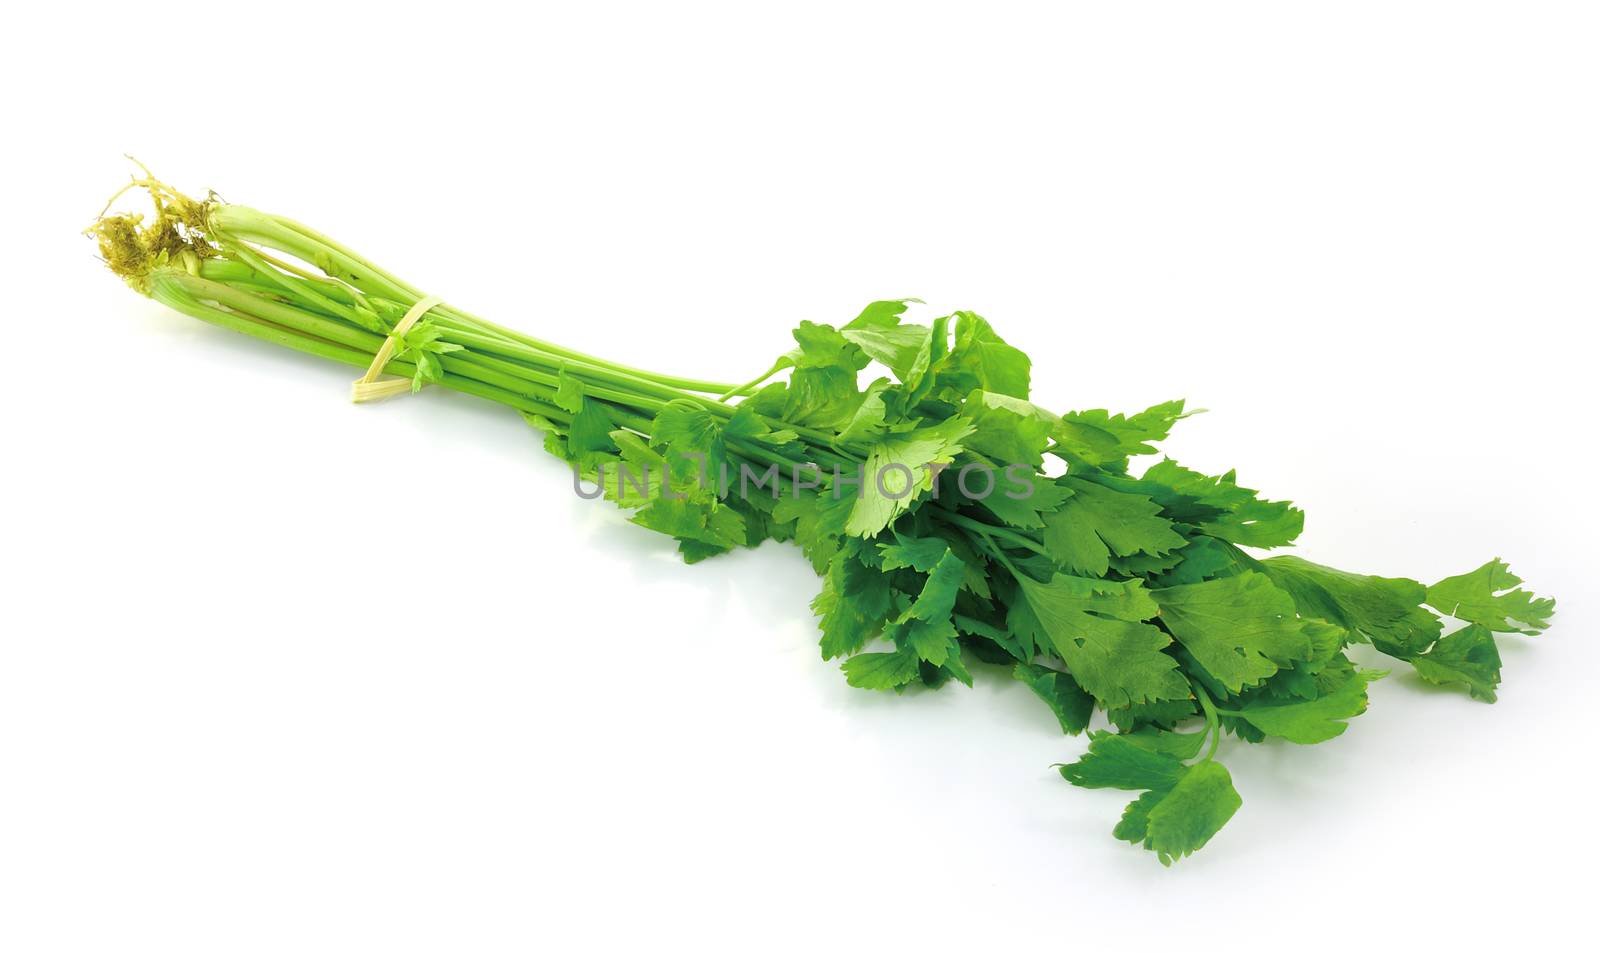 Celery on white background by sommai